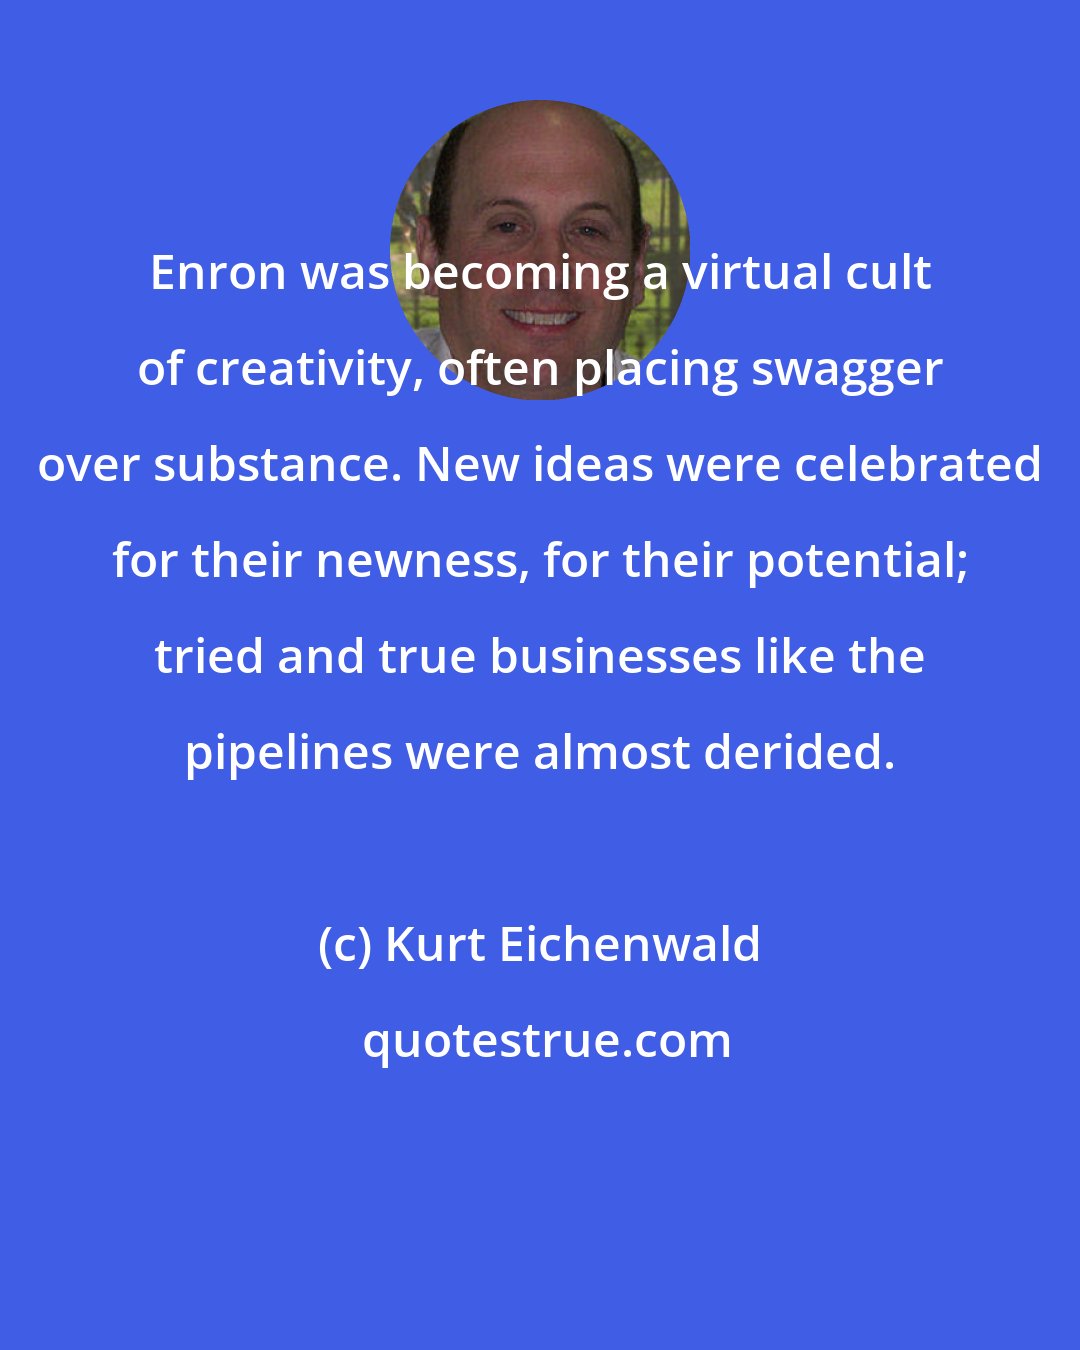 Kurt Eichenwald: Enron was becoming a virtual cult of creativity, often placing swagger over substance. New ideas were celebrated for their newness, for their potential; tried and true businesses like the pipelines were almost derided.